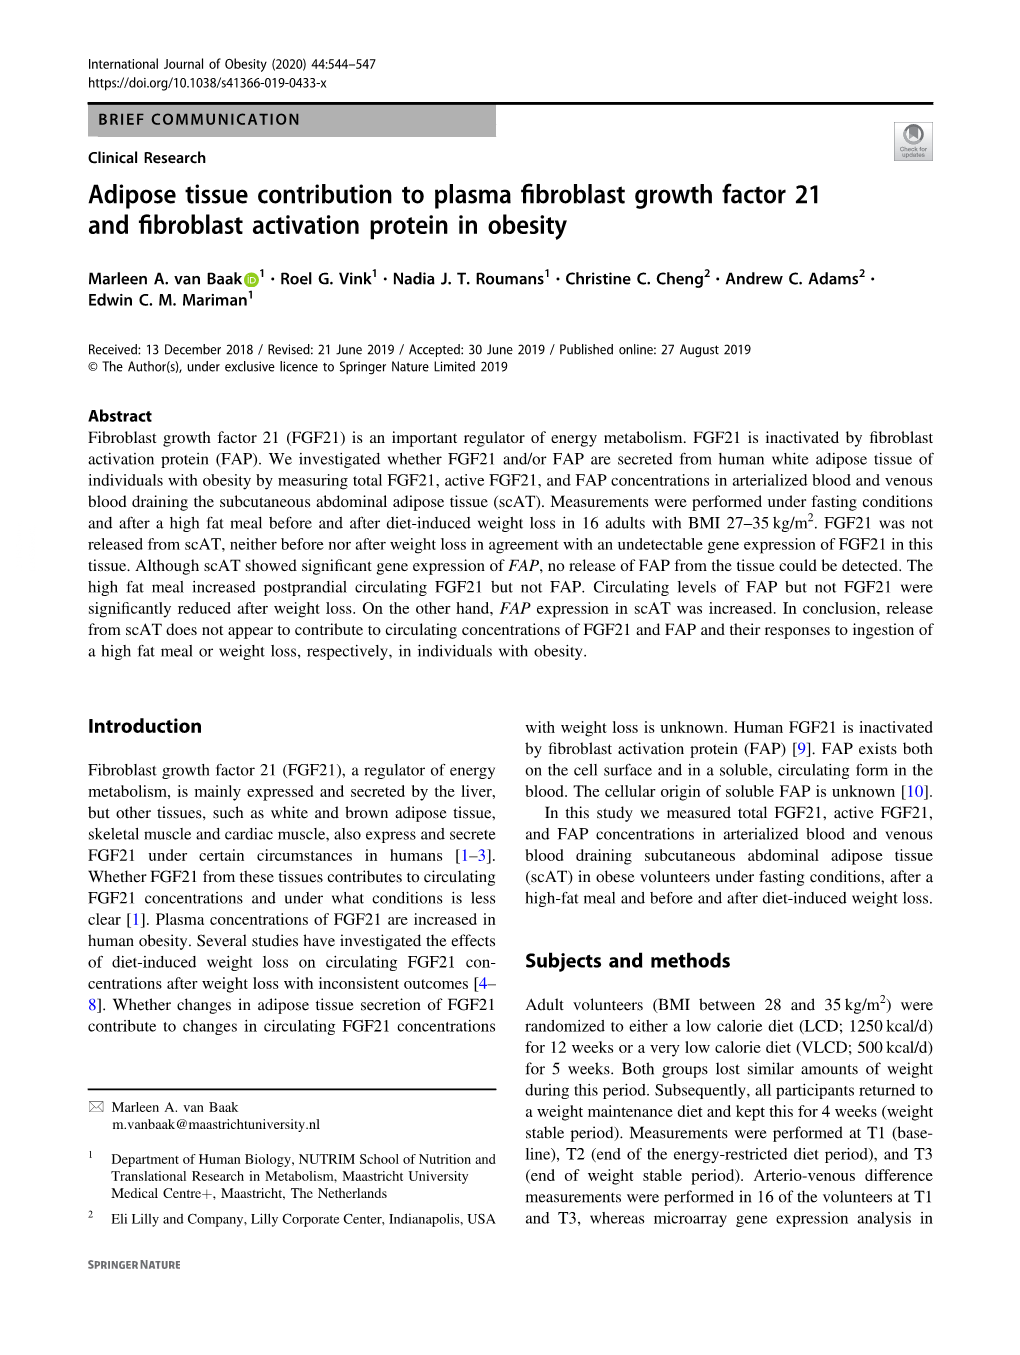 Adipose Tissue Contribution to Plasma Fibroblast Growth Factor 21 and Fibroblast Activation Protein in Obesity